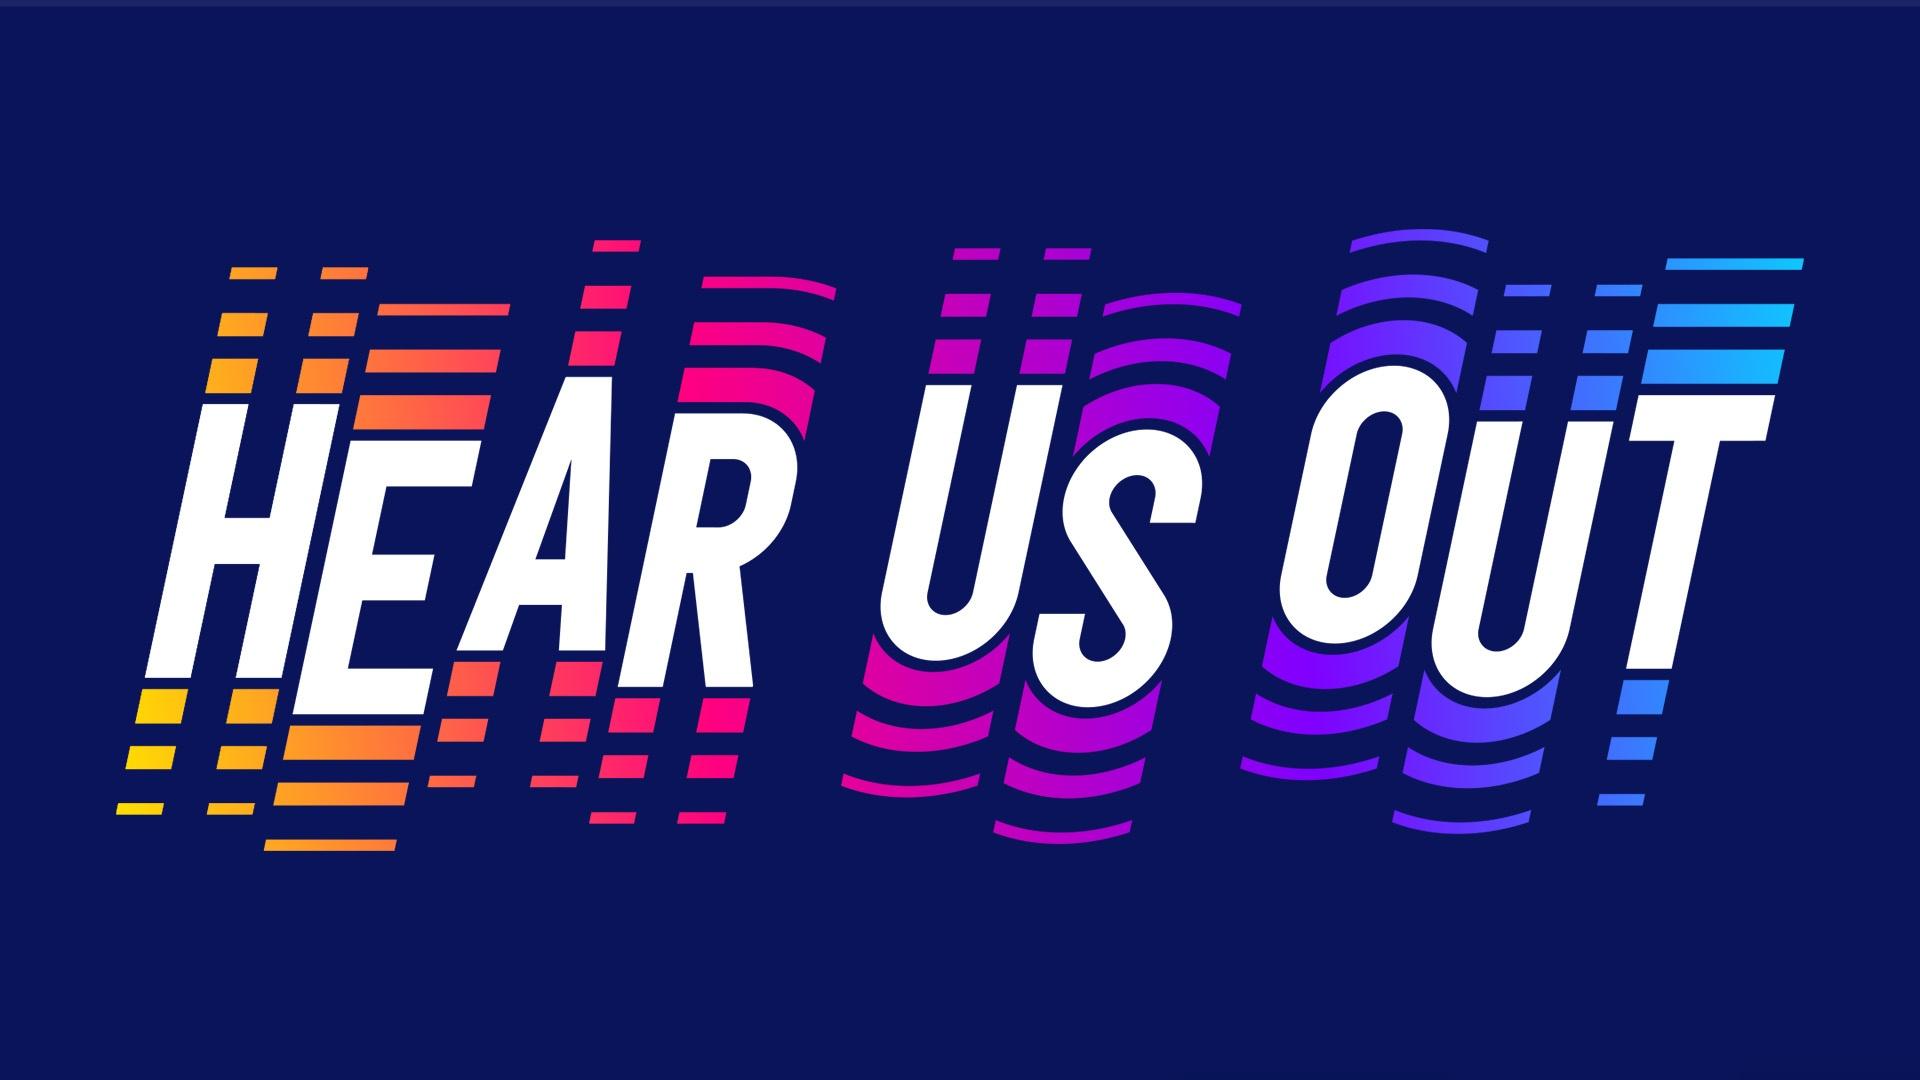 "HEAR US OUT" in white text with rainbow borders over a navy background 